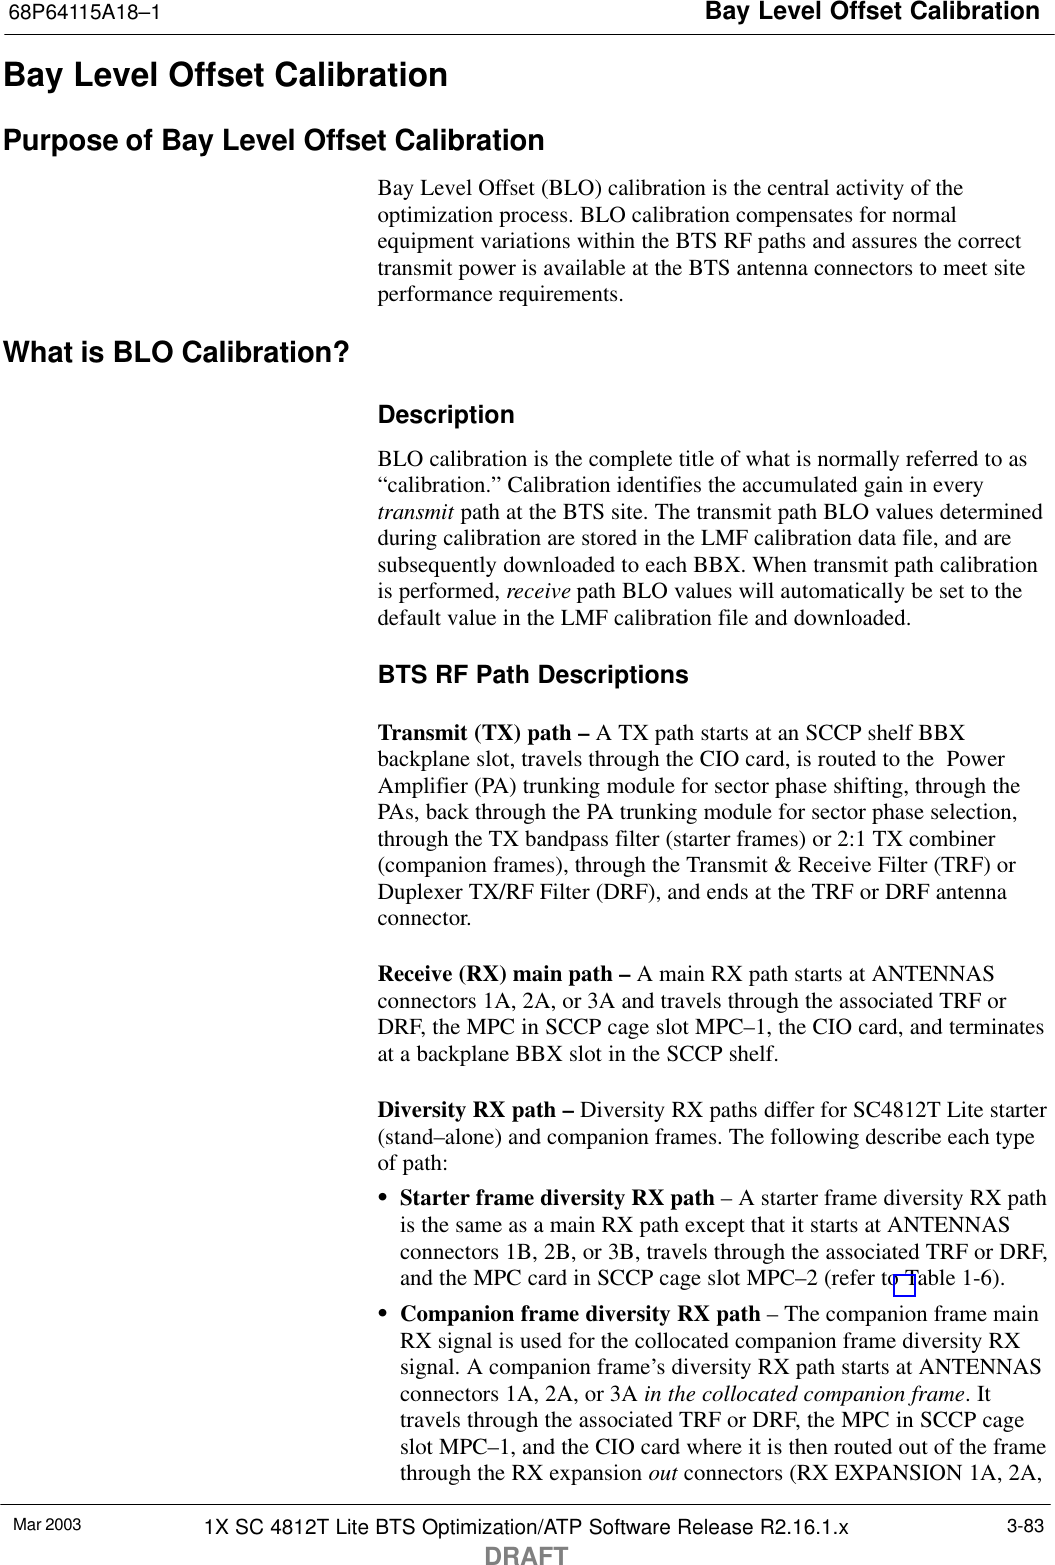 Bay Level Offset Calibration68P64115A18–1Mar 2003 1X SC 4812T Lite BTS Optimization/ATP Software Release R2.16.1.xDRAFT3-83Bay Level Offset CalibrationPurpose of Bay Level Offset CalibrationBay Level Offset (BLO) calibration is the central activity of theoptimization process. BLO calibration compensates for normalequipment variations within the BTS RF paths and assures the correcttransmit power is available at the BTS antenna connectors to meet siteperformance requirements.What is BLO Calibration?DescriptionBLO calibration is the complete title of what is normally referred to as“calibration.” Calibration identifies the accumulated gain in everytransmit path at the BTS site. The transmit path BLO values determinedduring calibration are stored in the LMF calibration data file, and aresubsequently downloaded to each BBX. When transmit path calibrationis performed, receive path BLO values will automatically be set to thedefault value in the LMF calibration file and downloaded.BTS RF Path DescriptionsTransmit (TX) path – A TX path starts at an SCCP shelf BBXbackplane slot, travels through the CIO card, is routed to the  PowerAmplifier (PA) trunking module for sector phase shifting, through thePAs, back through the PA trunking module for sector phase selection,through the TX bandpass filter (starter frames) or 2:1 TX combiner(companion frames), through the Transmit &amp; Receive Filter (TRF) orDuplexer TX/RF Filter (DRF), and ends at the TRF or DRF antennaconnector.Receive (RX) main path – A main RX path starts at ANTENNASconnectors 1A, 2A, or 3A and travels through the associated TRF orDRF, the MPC in SCCP cage slot MPC–1, the CIO card, and terminatesat a backplane BBX slot in the SCCP shelf.Diversity RX path – Diversity RX paths differ for SC4812T Lite starter(stand–alone) and companion frames. The following describe each typeof path:SStarter frame diversity RX path – A starter frame diversity RX pathis the same as a main RX path except that it starts at ANTENNASconnectors 1B, 2B, or 3B, travels through the associated TRF or DRF,and the MPC card in SCCP cage slot MPC–2 (refer to Table 1-6).SCompanion frame diversity RX path – The companion frame mainRX signal is used for the collocated companion frame diversity RXsignal. A companion frame’s diversity RX path starts at ANTENNASconnectors 1A, 2A, or 3A in the collocated companion frame. Ittravels through the associated TRF or DRF, the MPC in SCCP cageslot MPC–1, and the CIO card where it is then routed out of the framethrough the RX expansion out connectors (RX EXPANSION 1A, 2A,